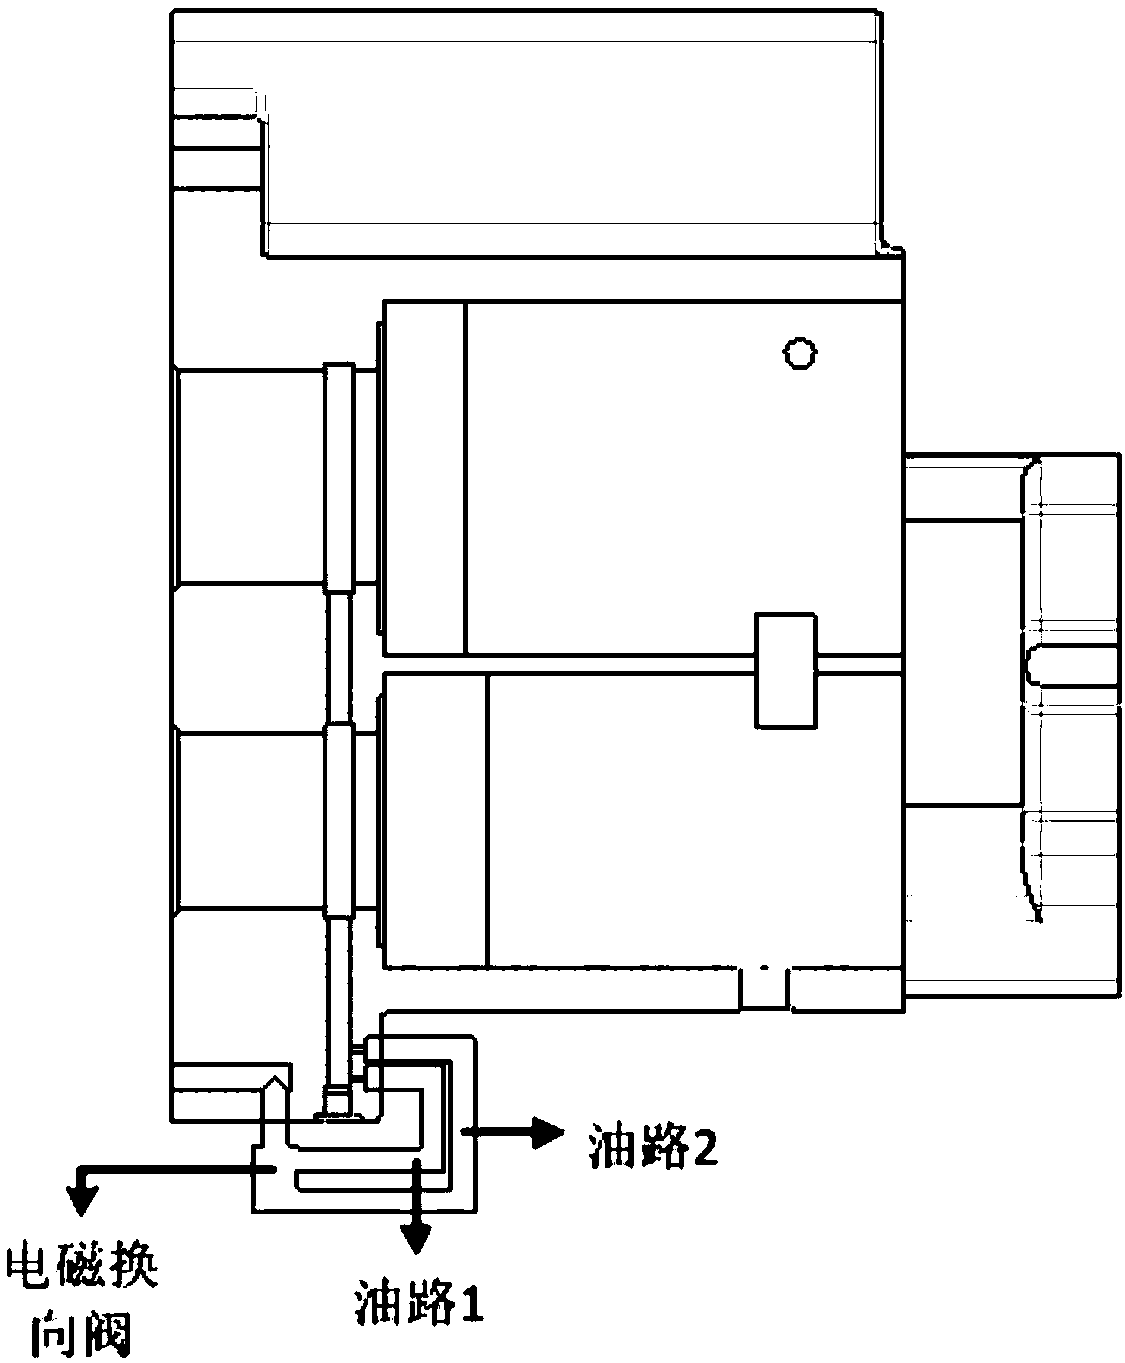 Oil supply device and method of bearing